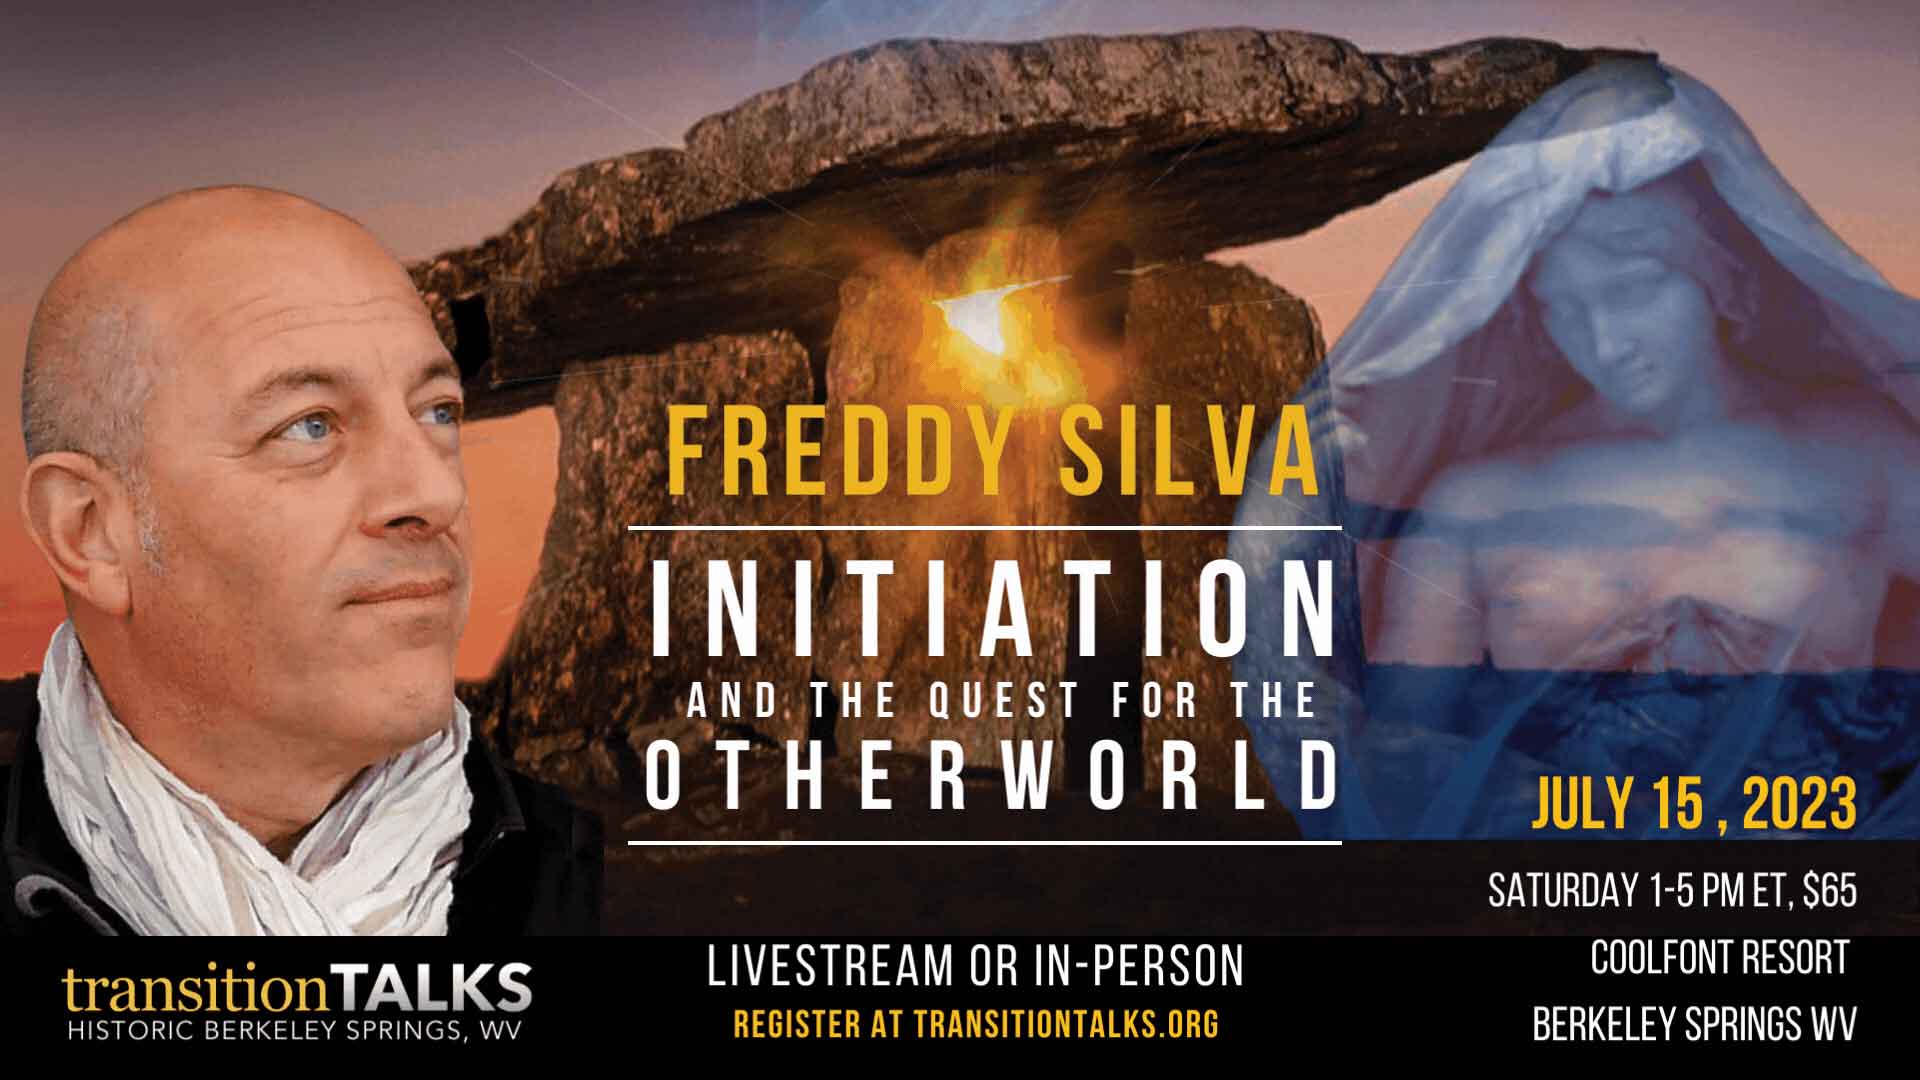 Freddy Silva. Initiation and the Quest for the Otherworld